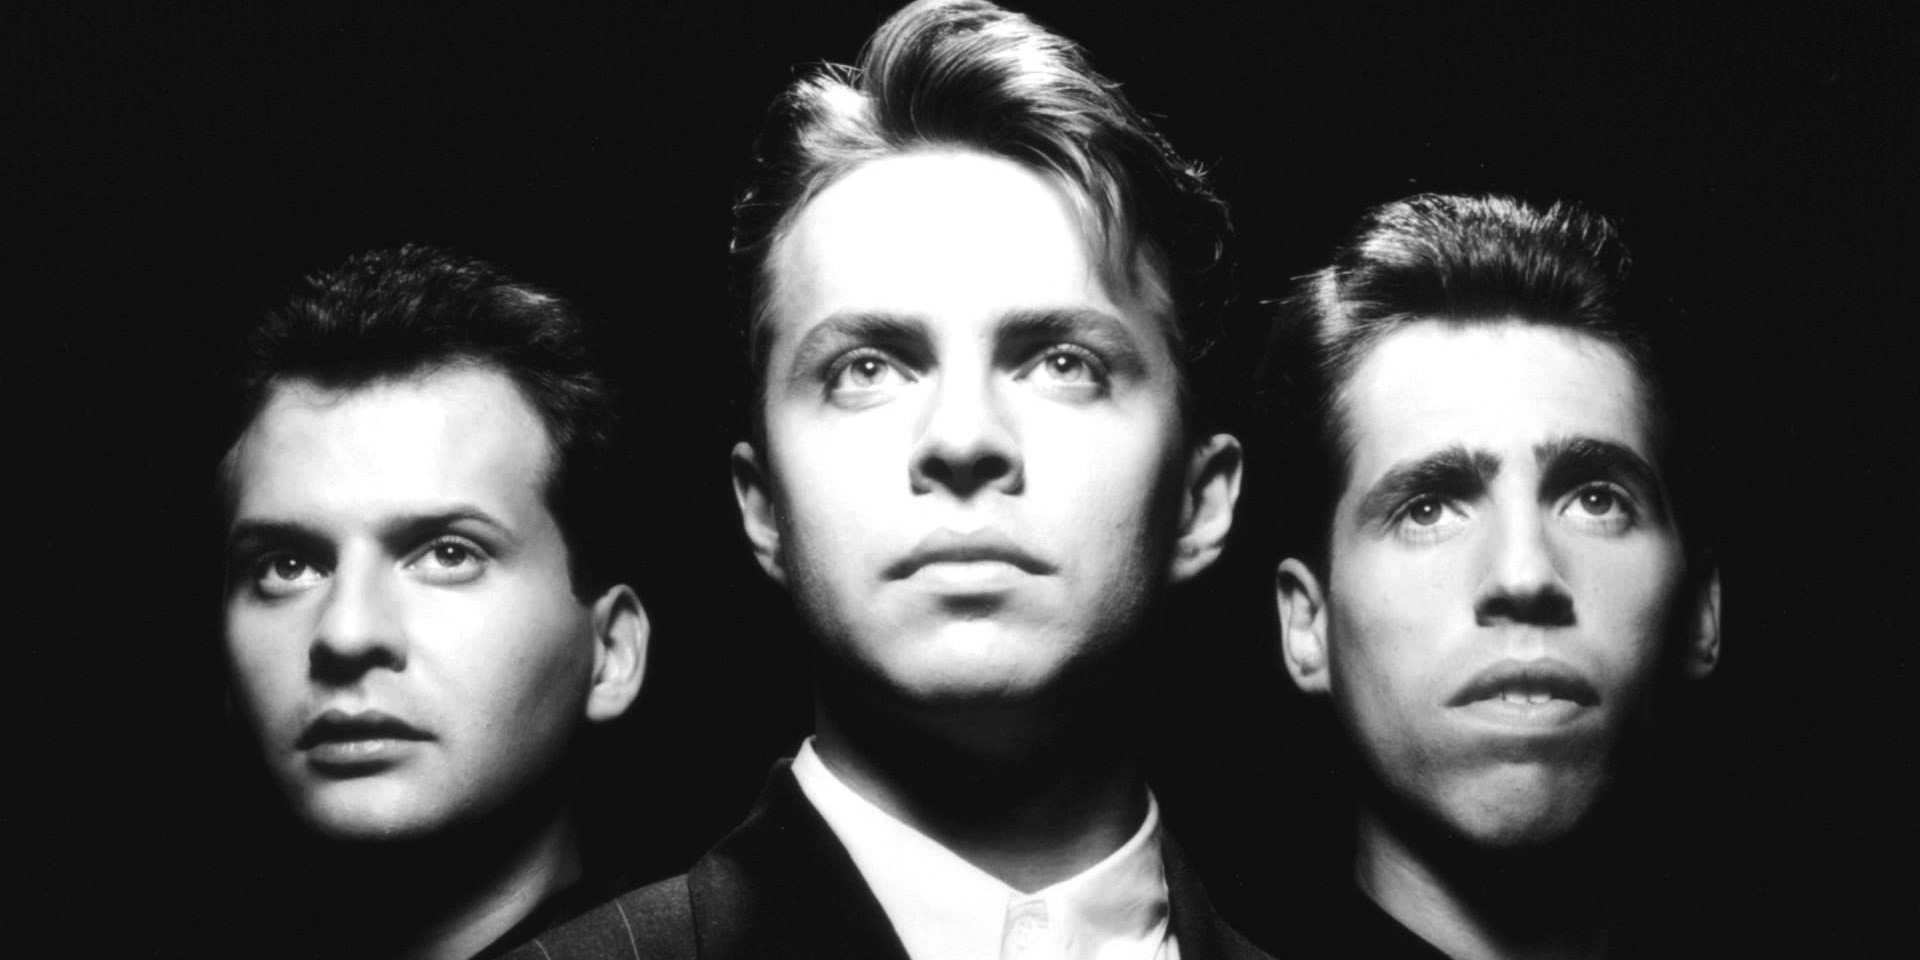 Johnny Hates Jazz to perform intimate 30th anniversary show in Singapore